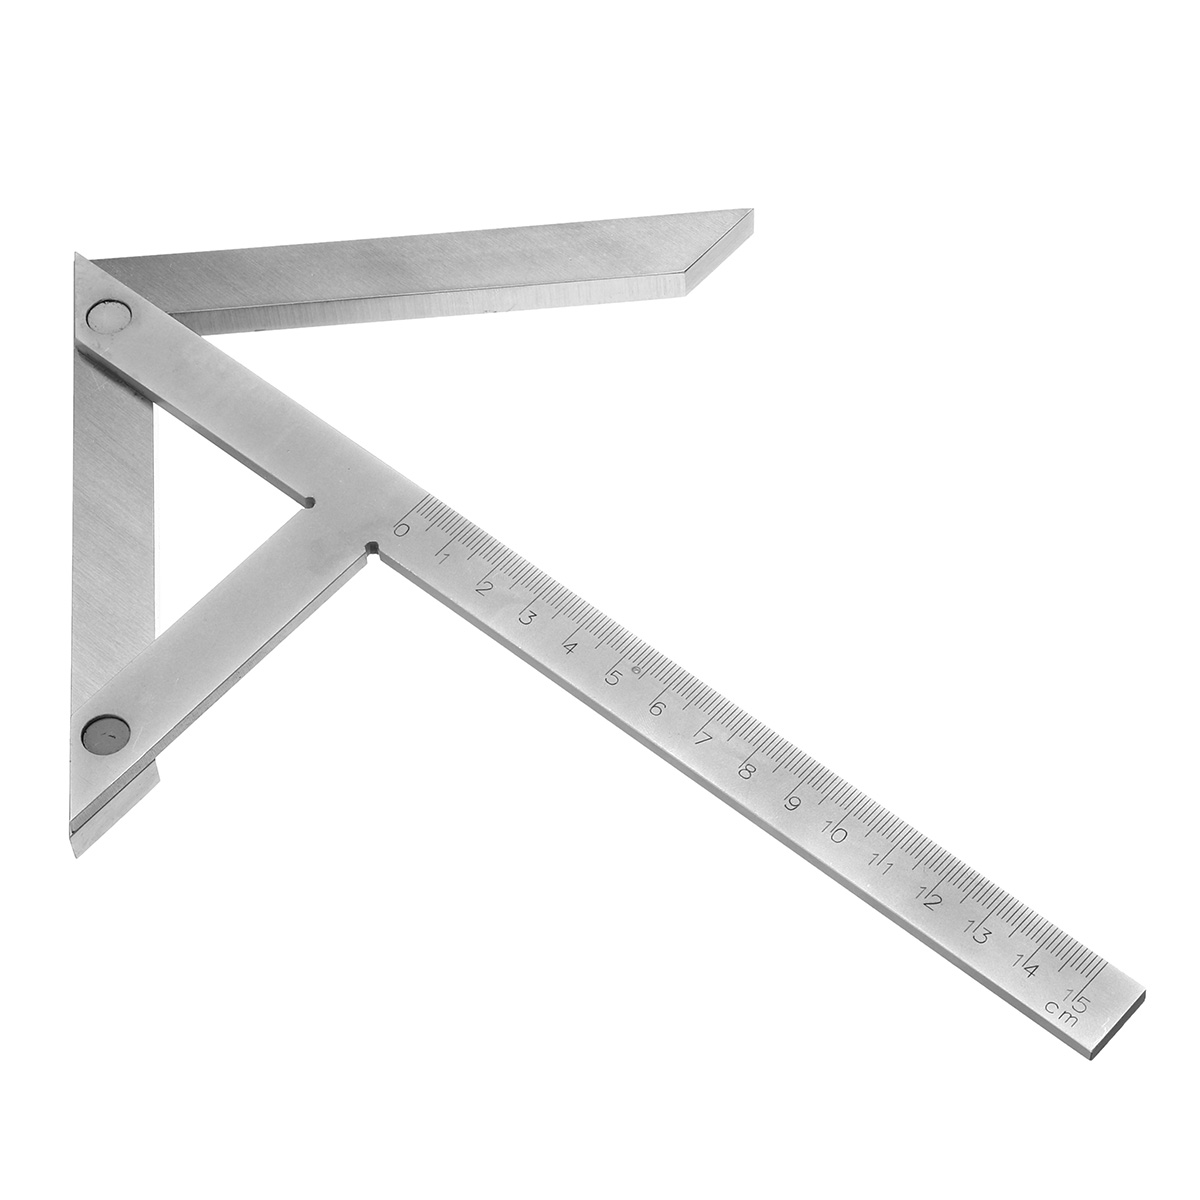 150x130mm-Precision-Center-Centering-Square-Gauge-Guaging-Round-Bar-Marking-Finder-Tool-1302764-4